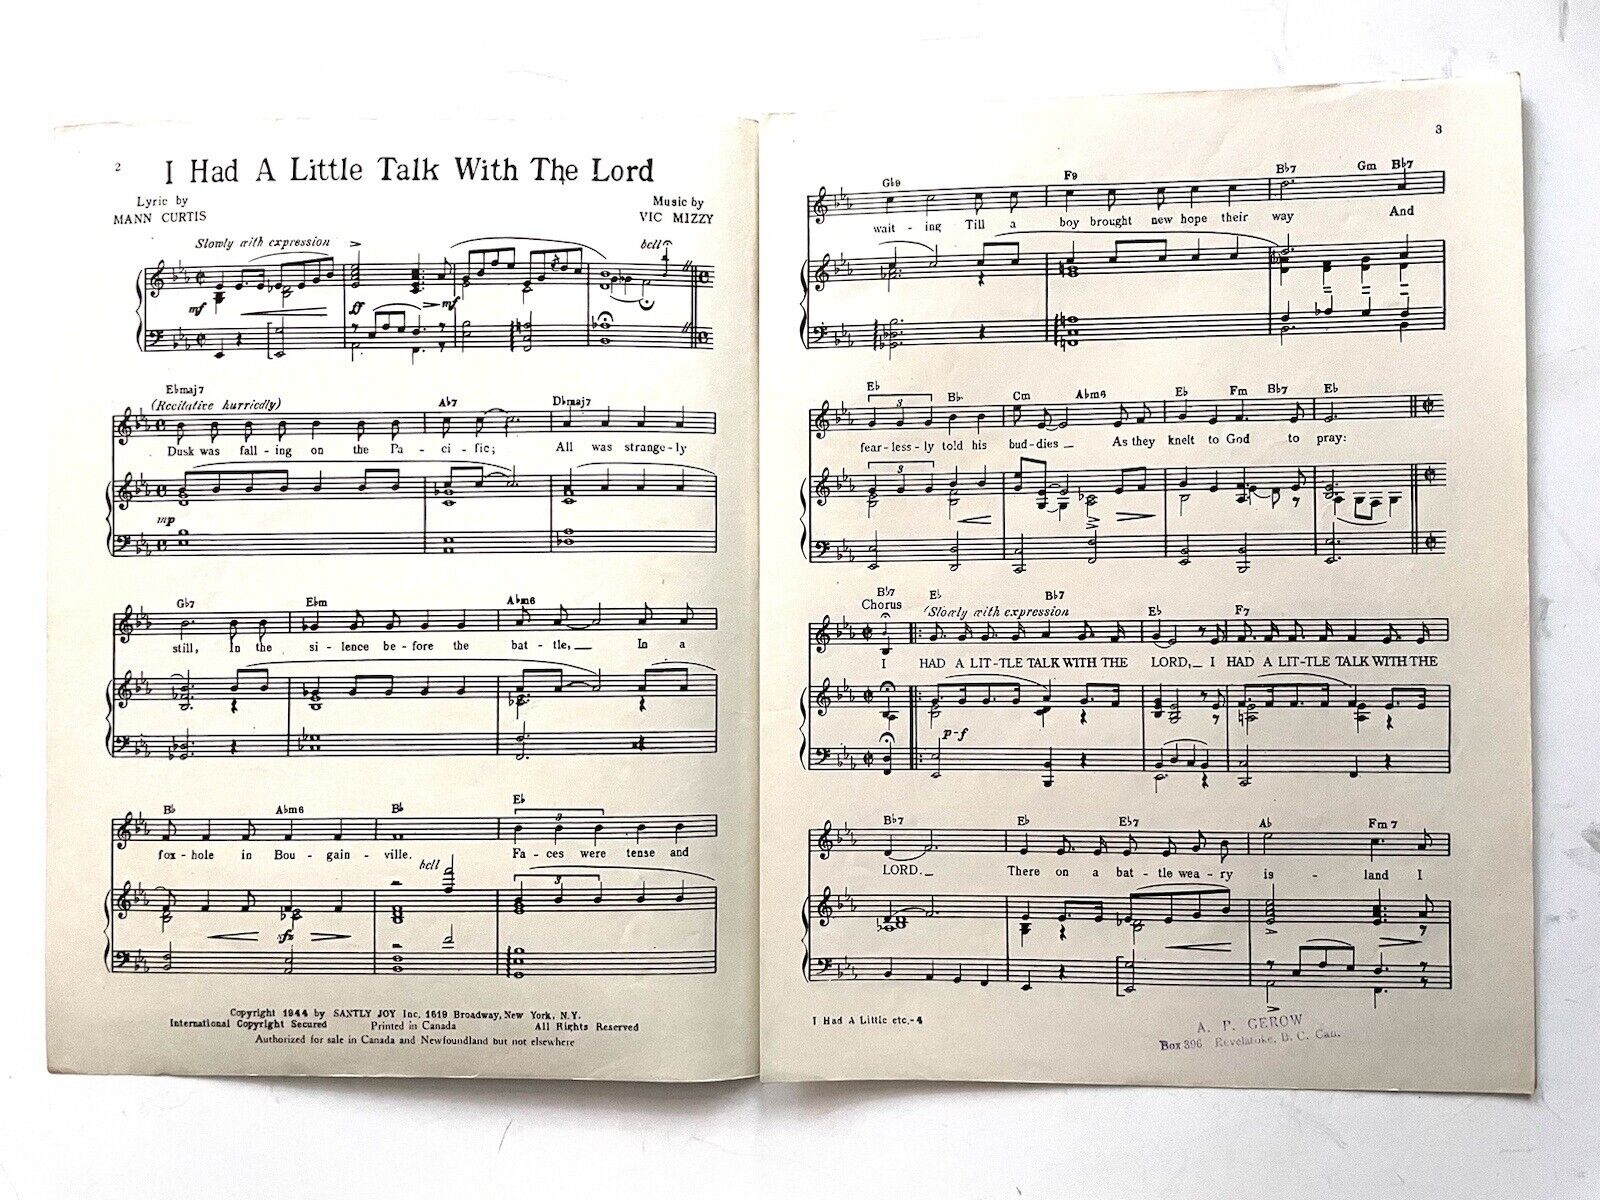 WW1 Canadian Sheet Music “I Had A Little Talk With The Lord”